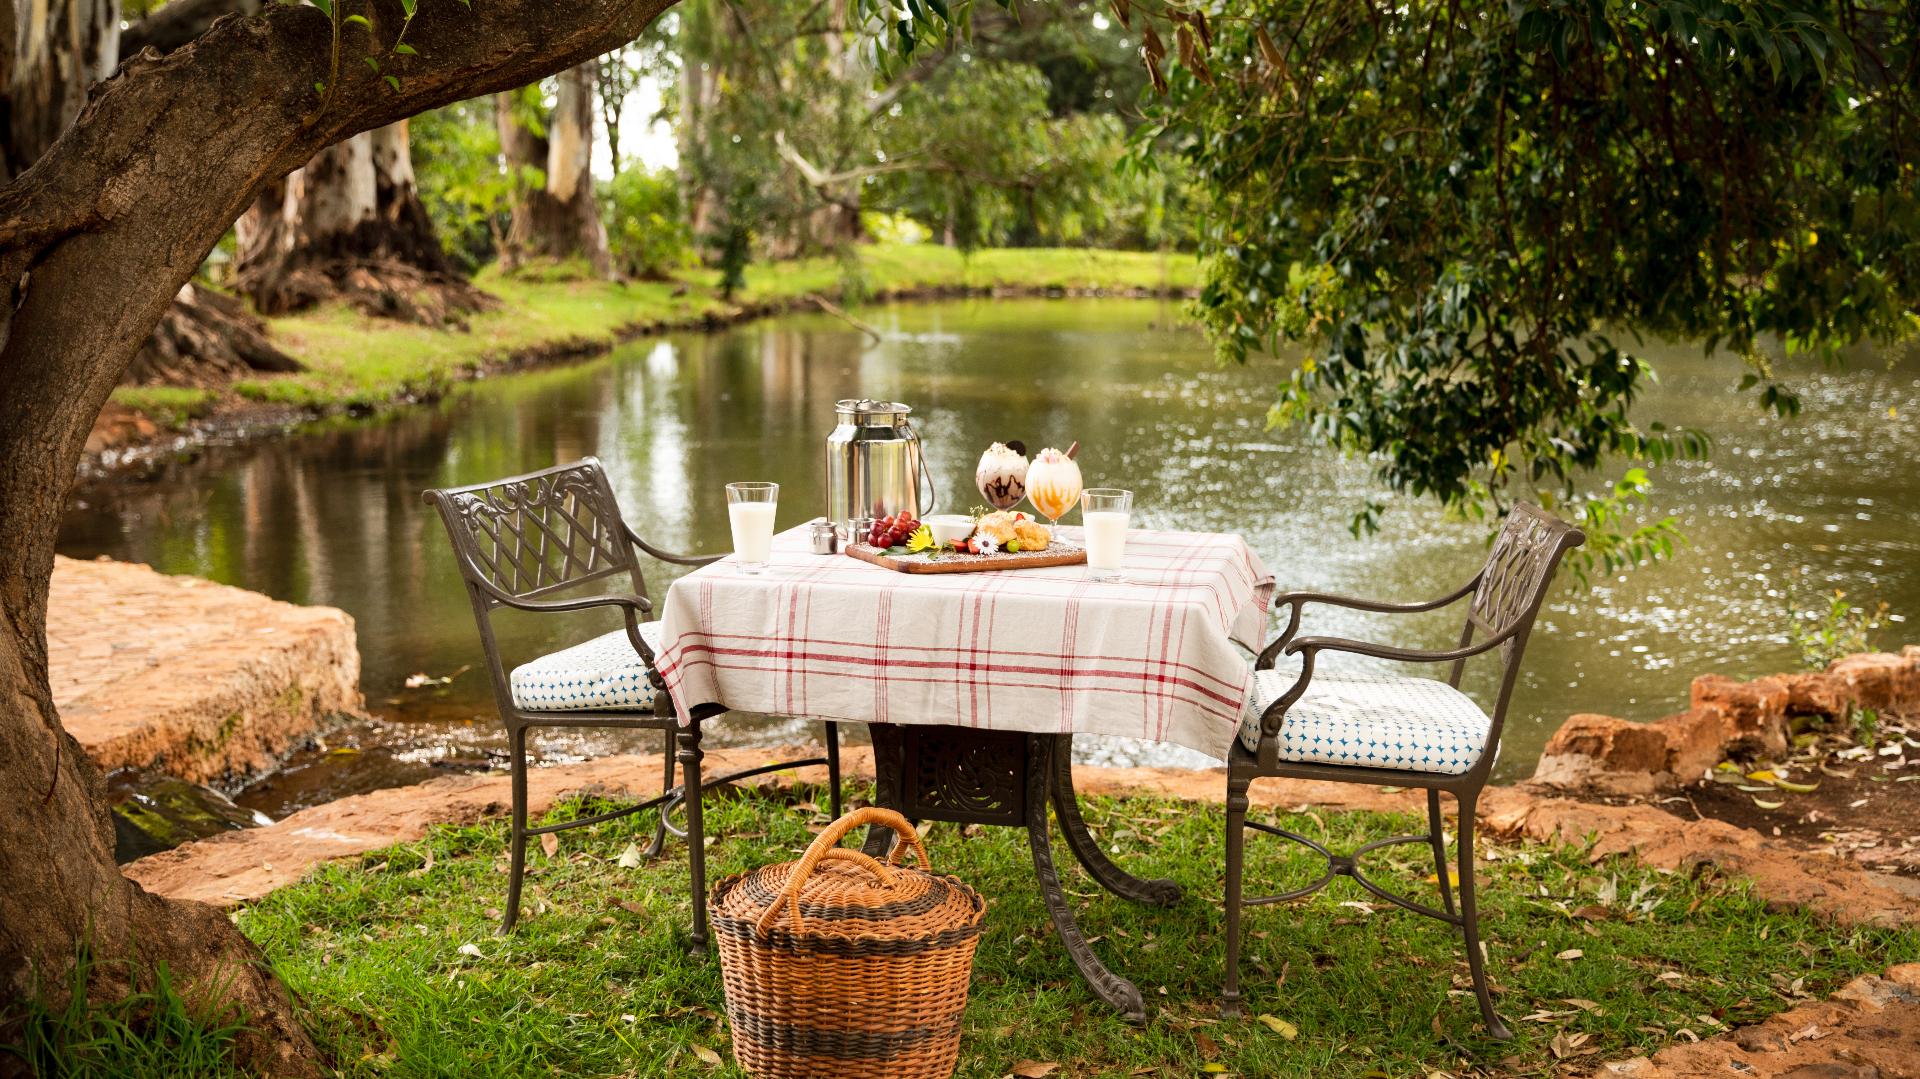 table by water with meal and picnic basket